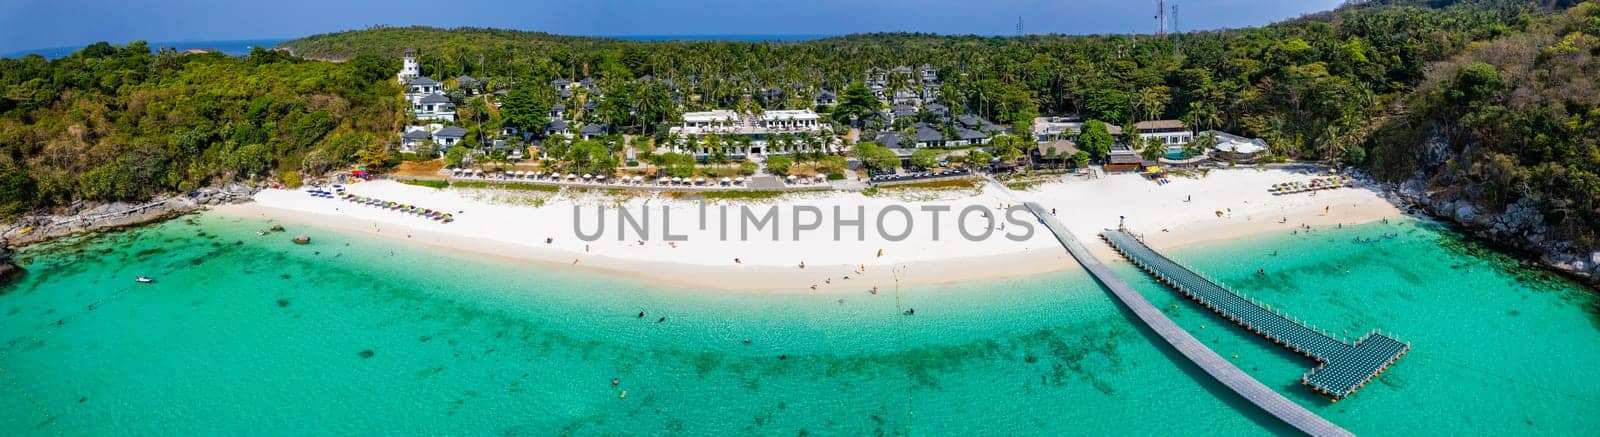 Aerial view of Siam bay in koh Racha Yai also known as Raya Island in Phuket, Thailand by worldpitou